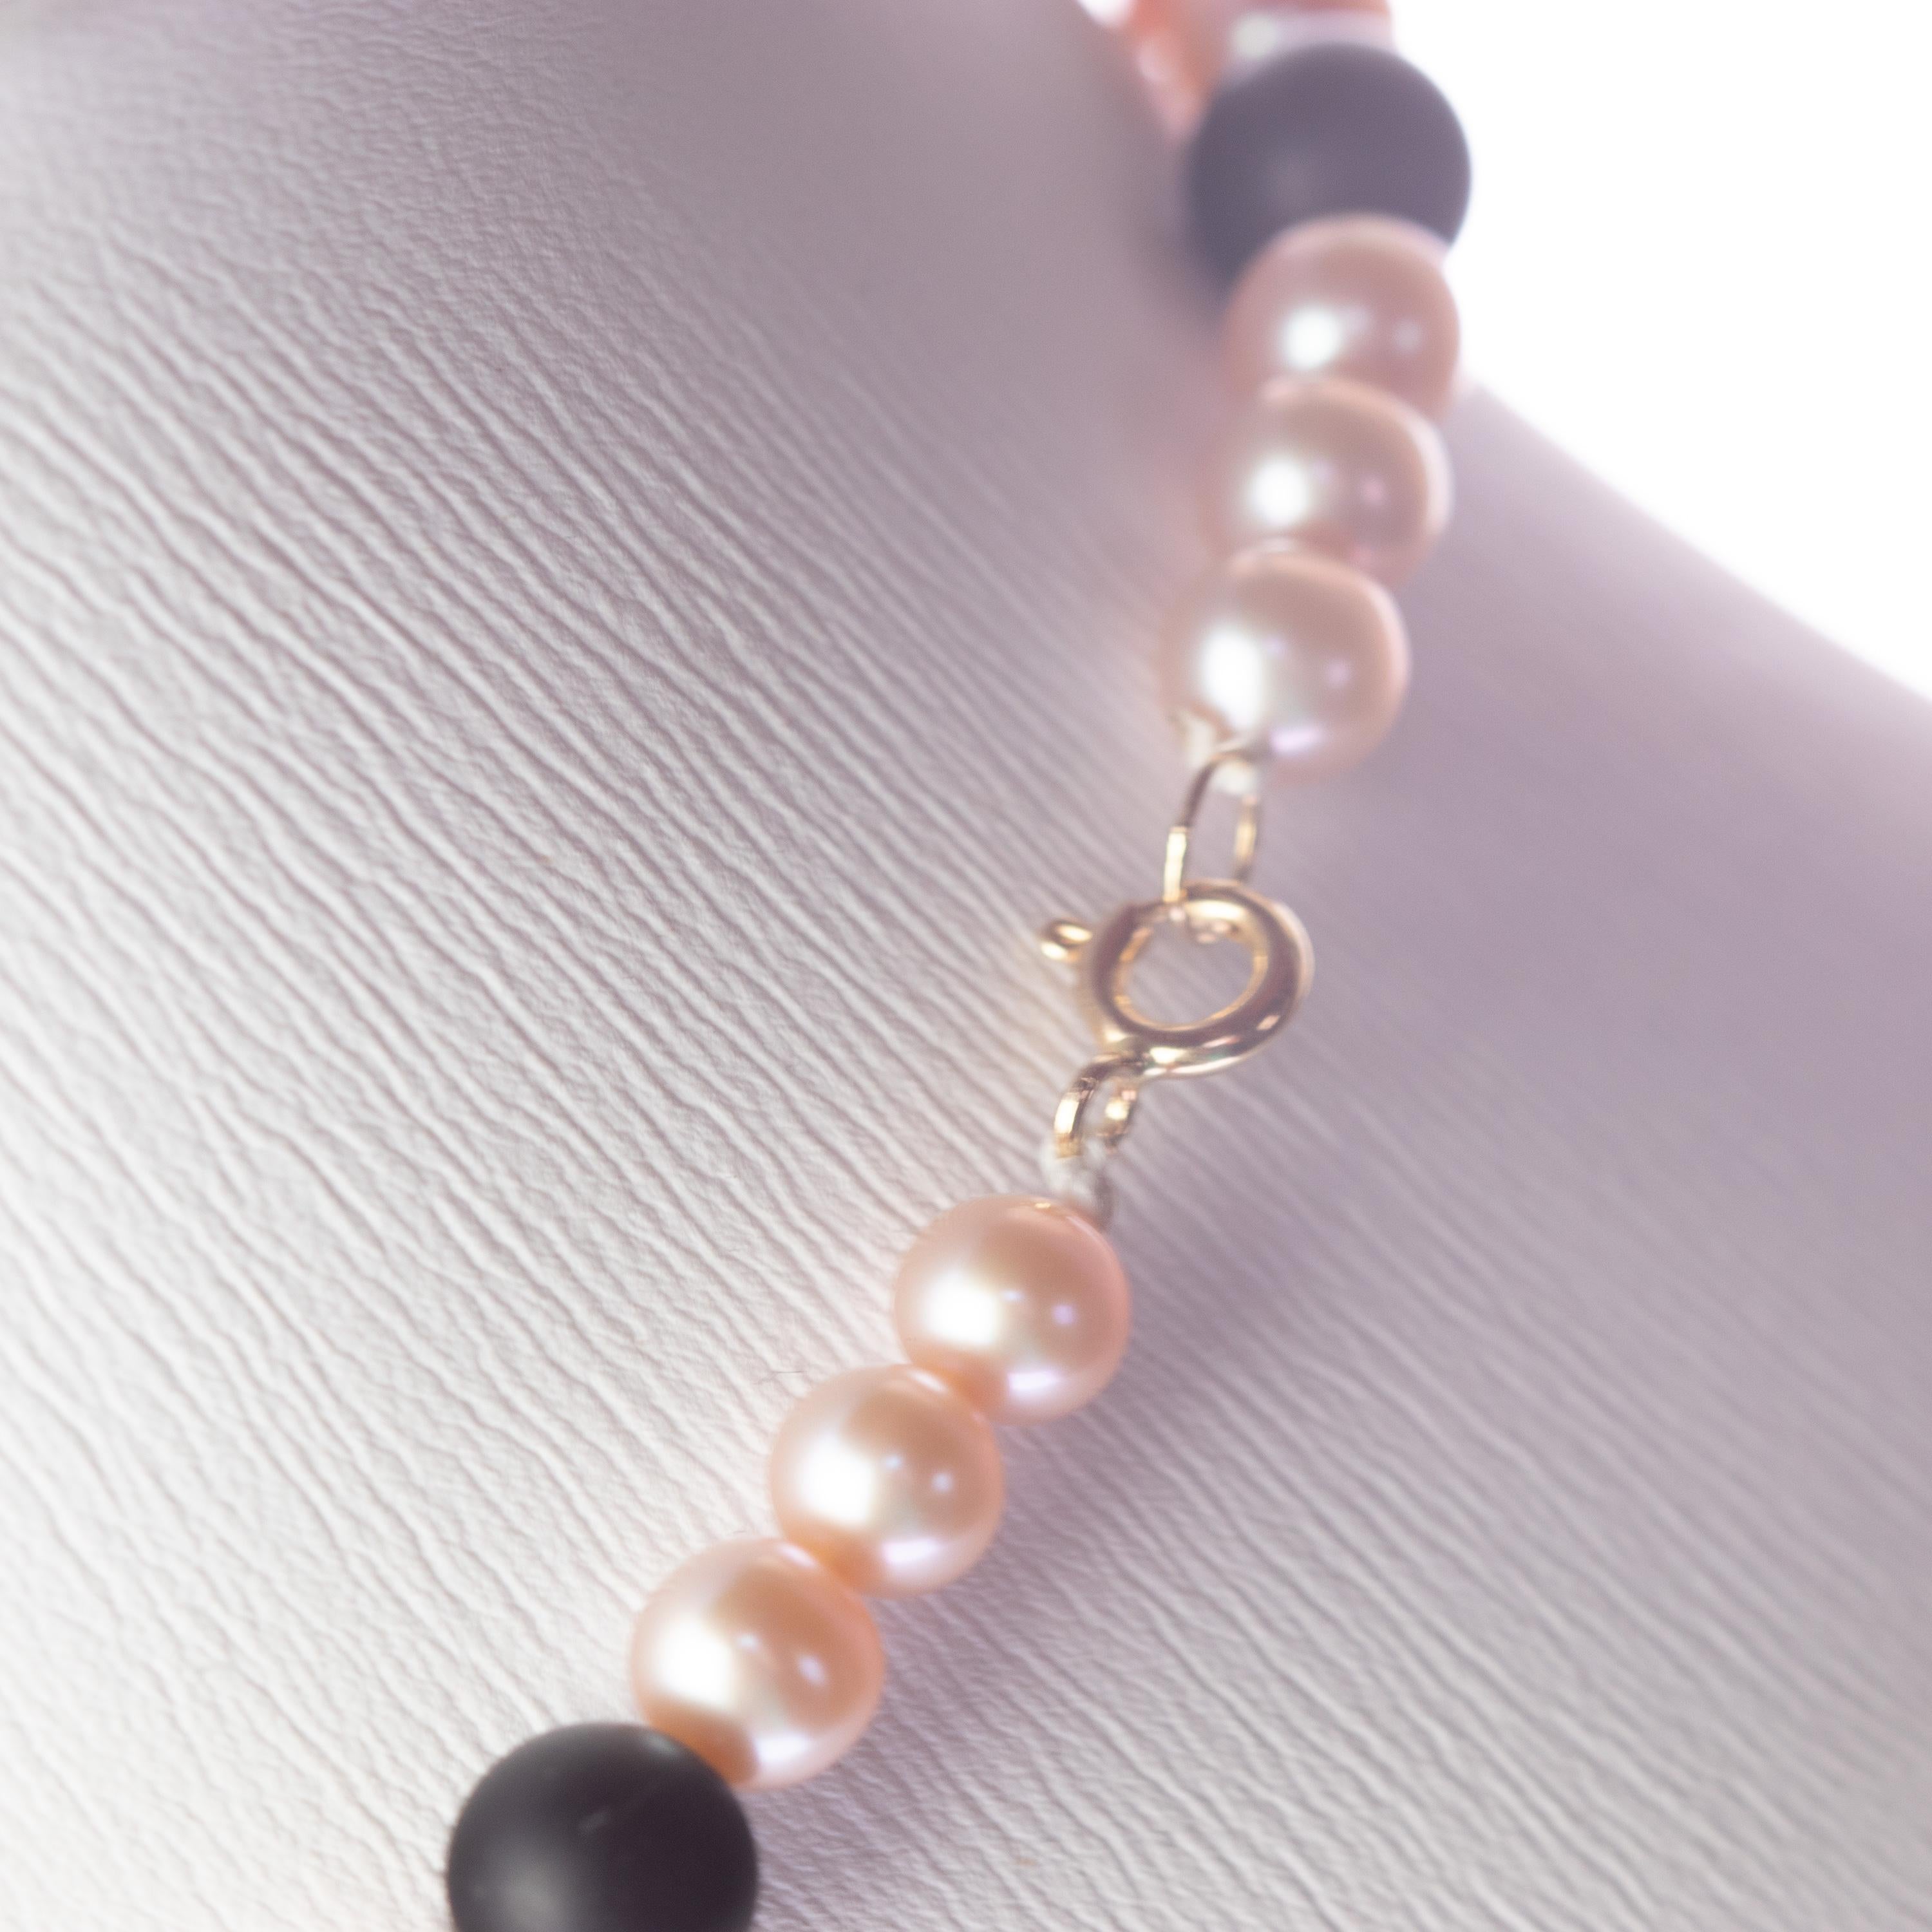 A natural agate and natural freshwater pearls necklace full of design. The perfect complement for a summer night. A modern and delicate style for a young and fearless woman. Natural precious stones beads with a 18 karat yellow gold closure.

An